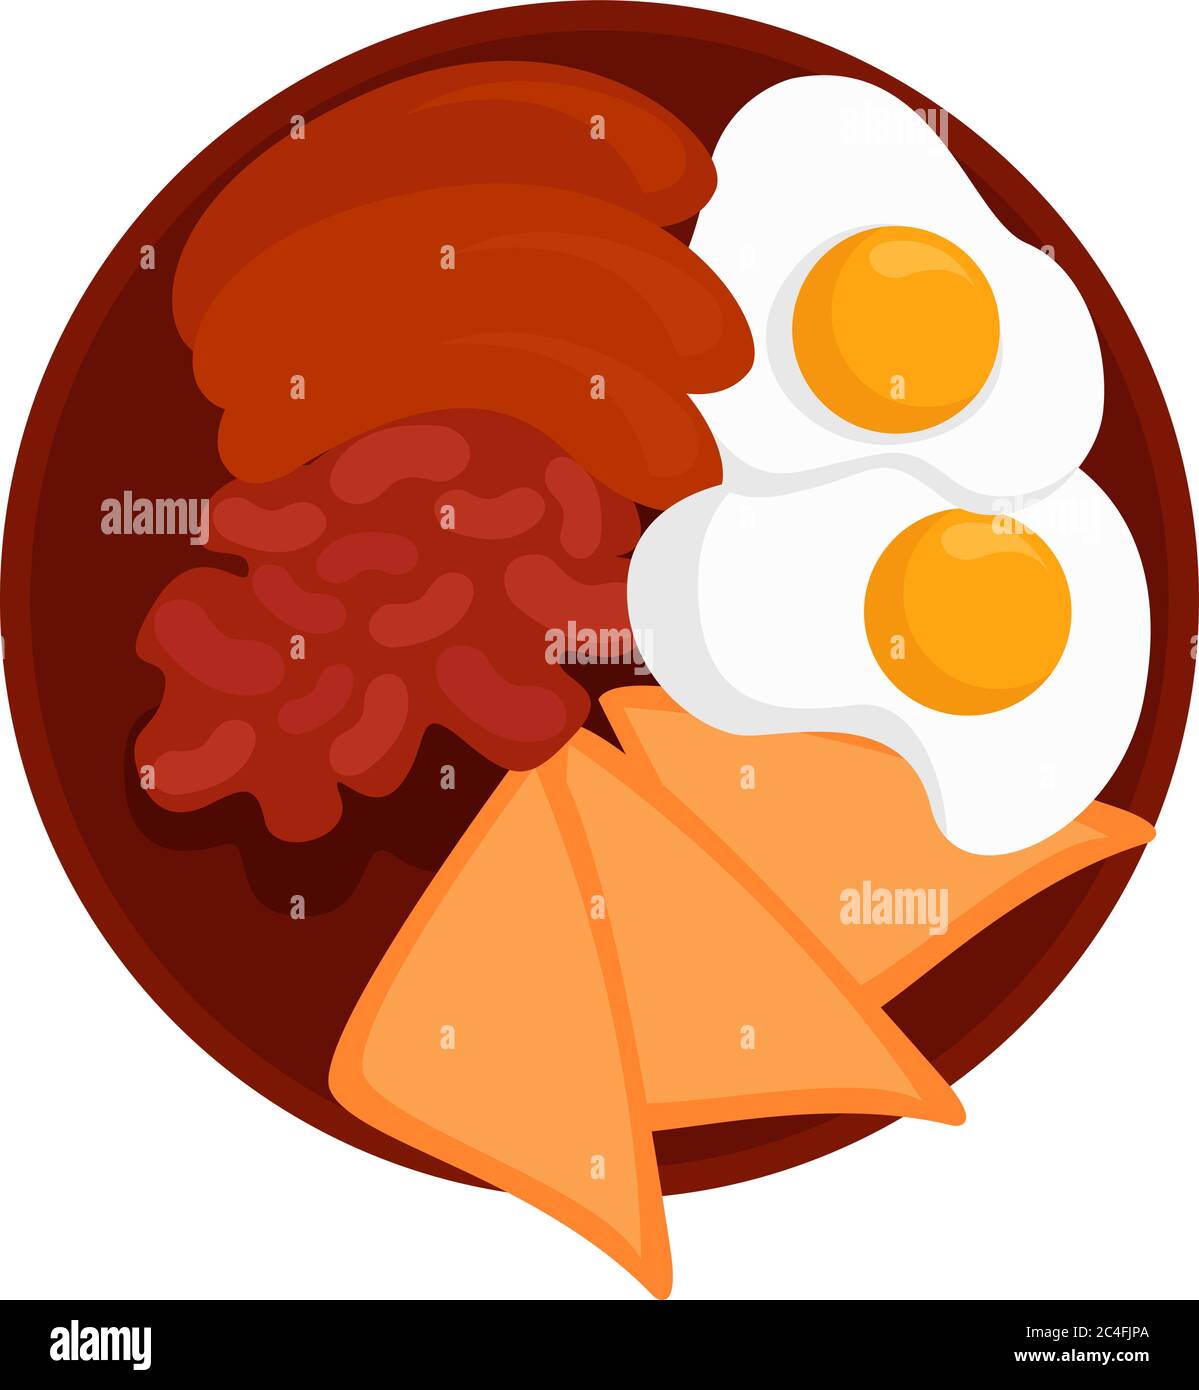 Breakfast in a plate, illustration, vector on white background Stock Vector